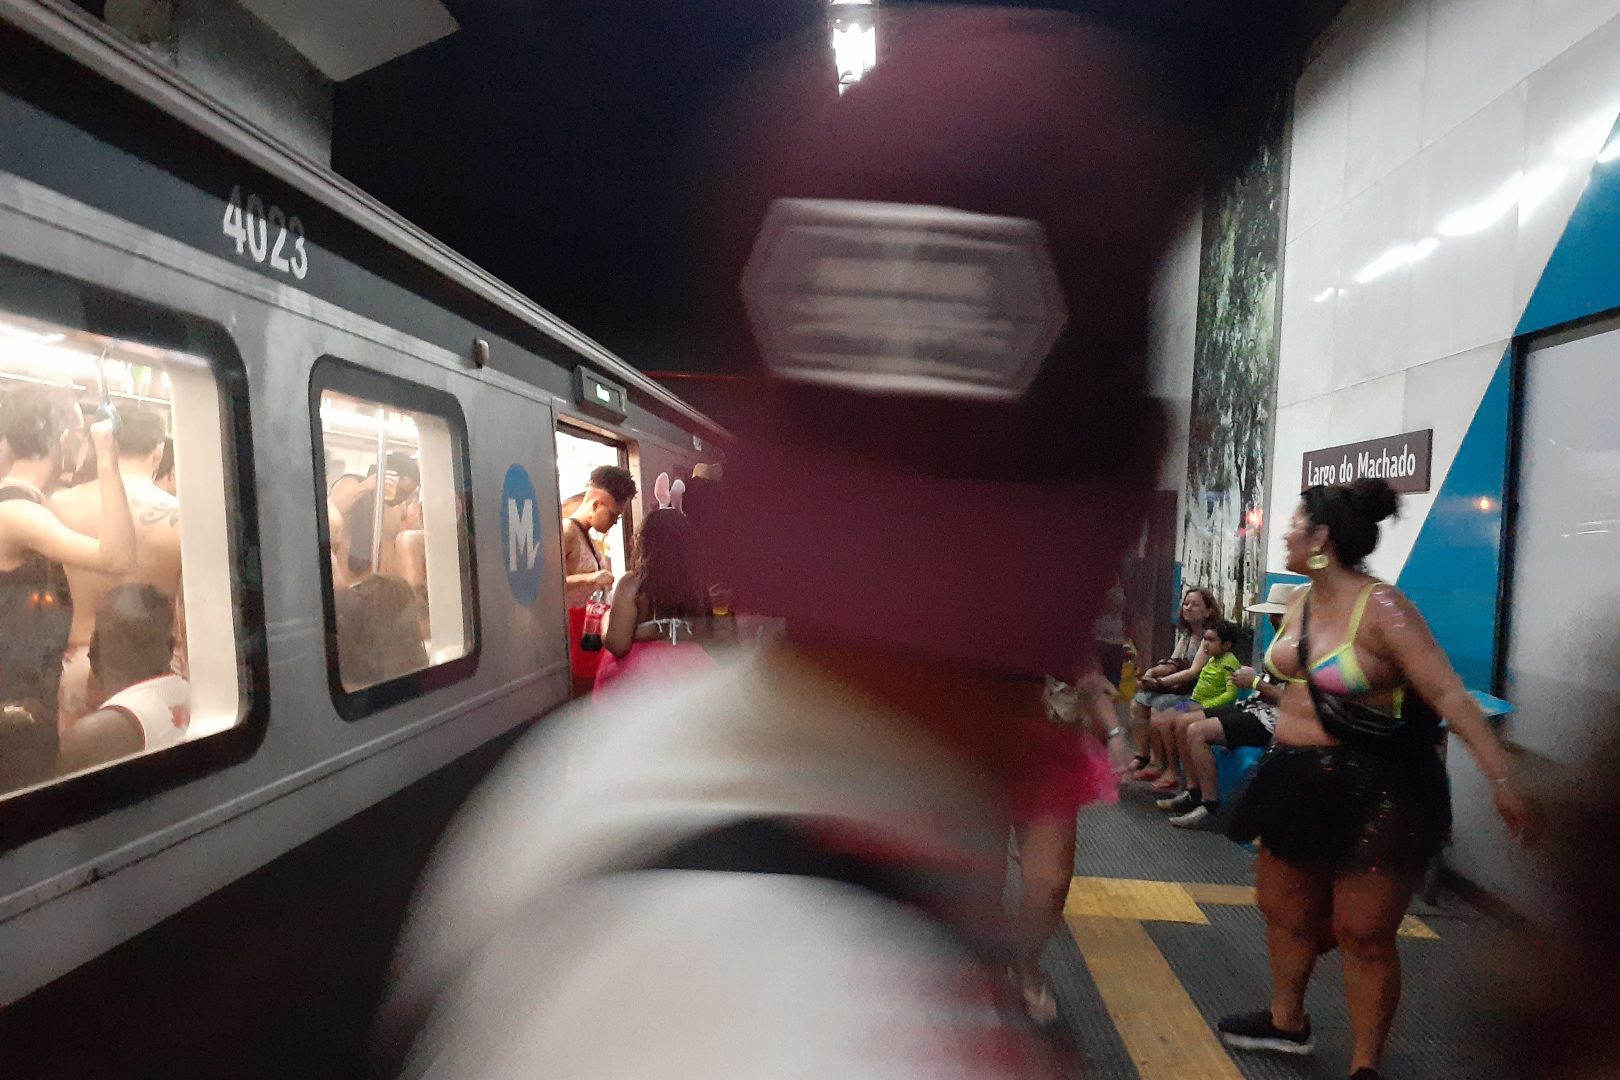 Taking the subway to Centro, looking for more blocos...